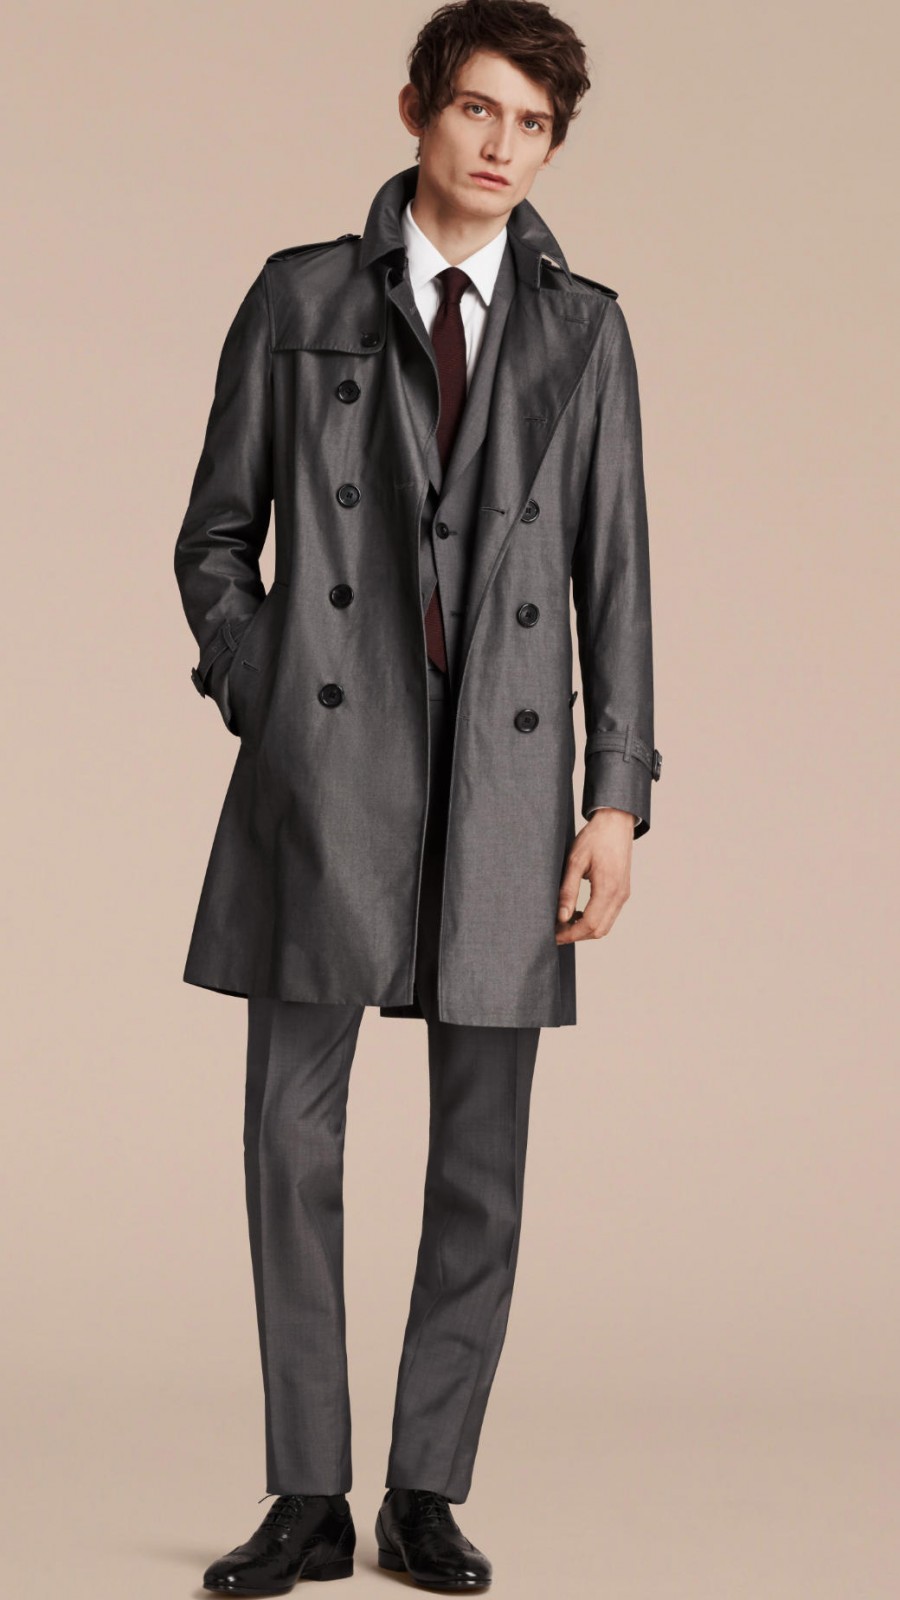 Mr. Burberry Collection Launches with Timeless Trenches – The Fashionisto